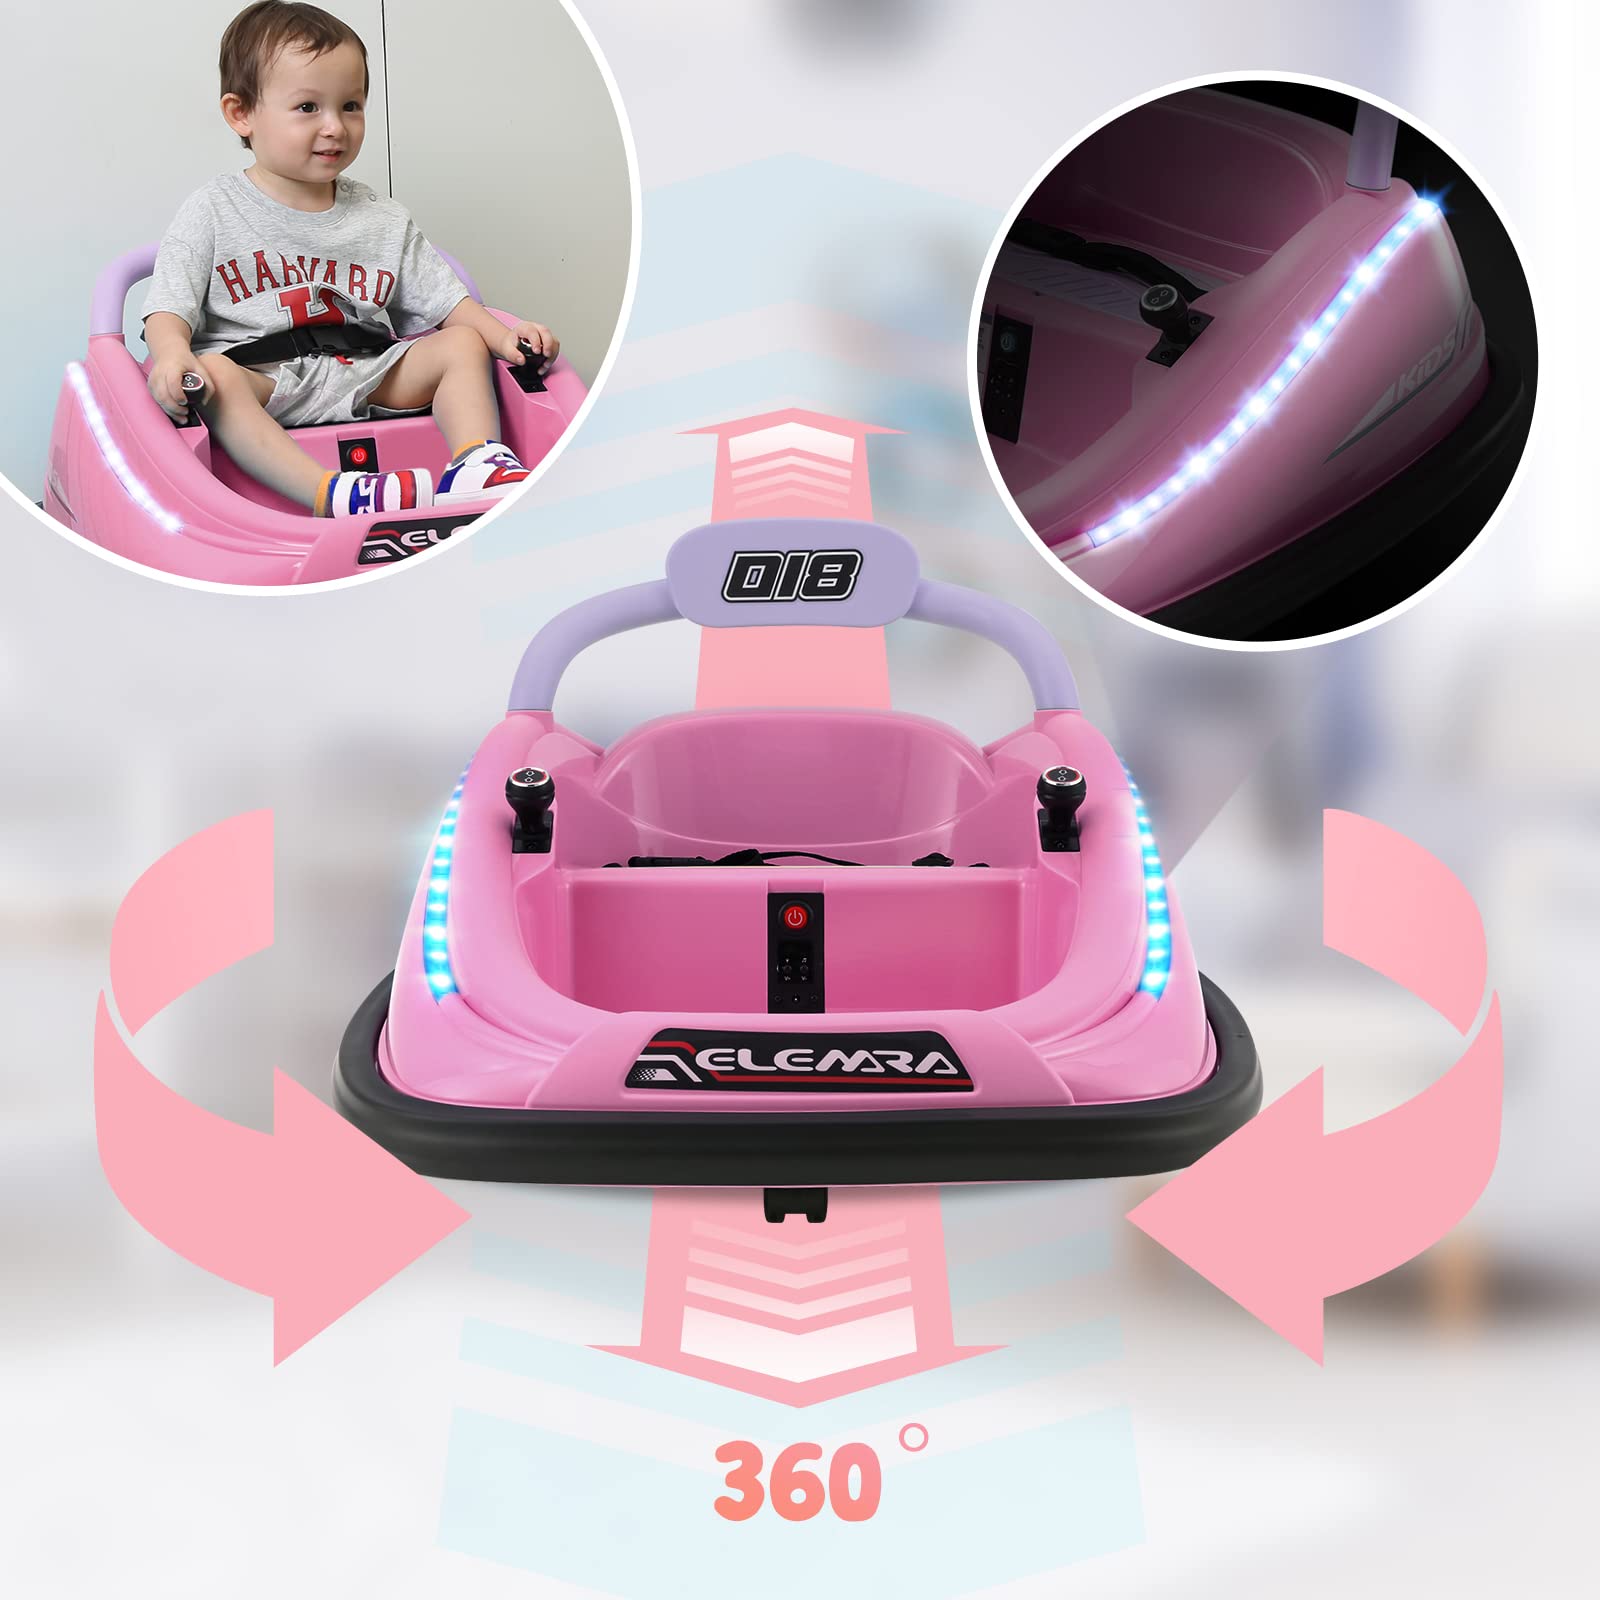 ELEMARA Bumper Car for Toddlers, 12V Electric Ride On Car Baby Bumper Car with 2 Driving Modes, Remote Control, Safety Belt,LED Lights and DIY Stickers Bumper Car for Kids, Large, Pink